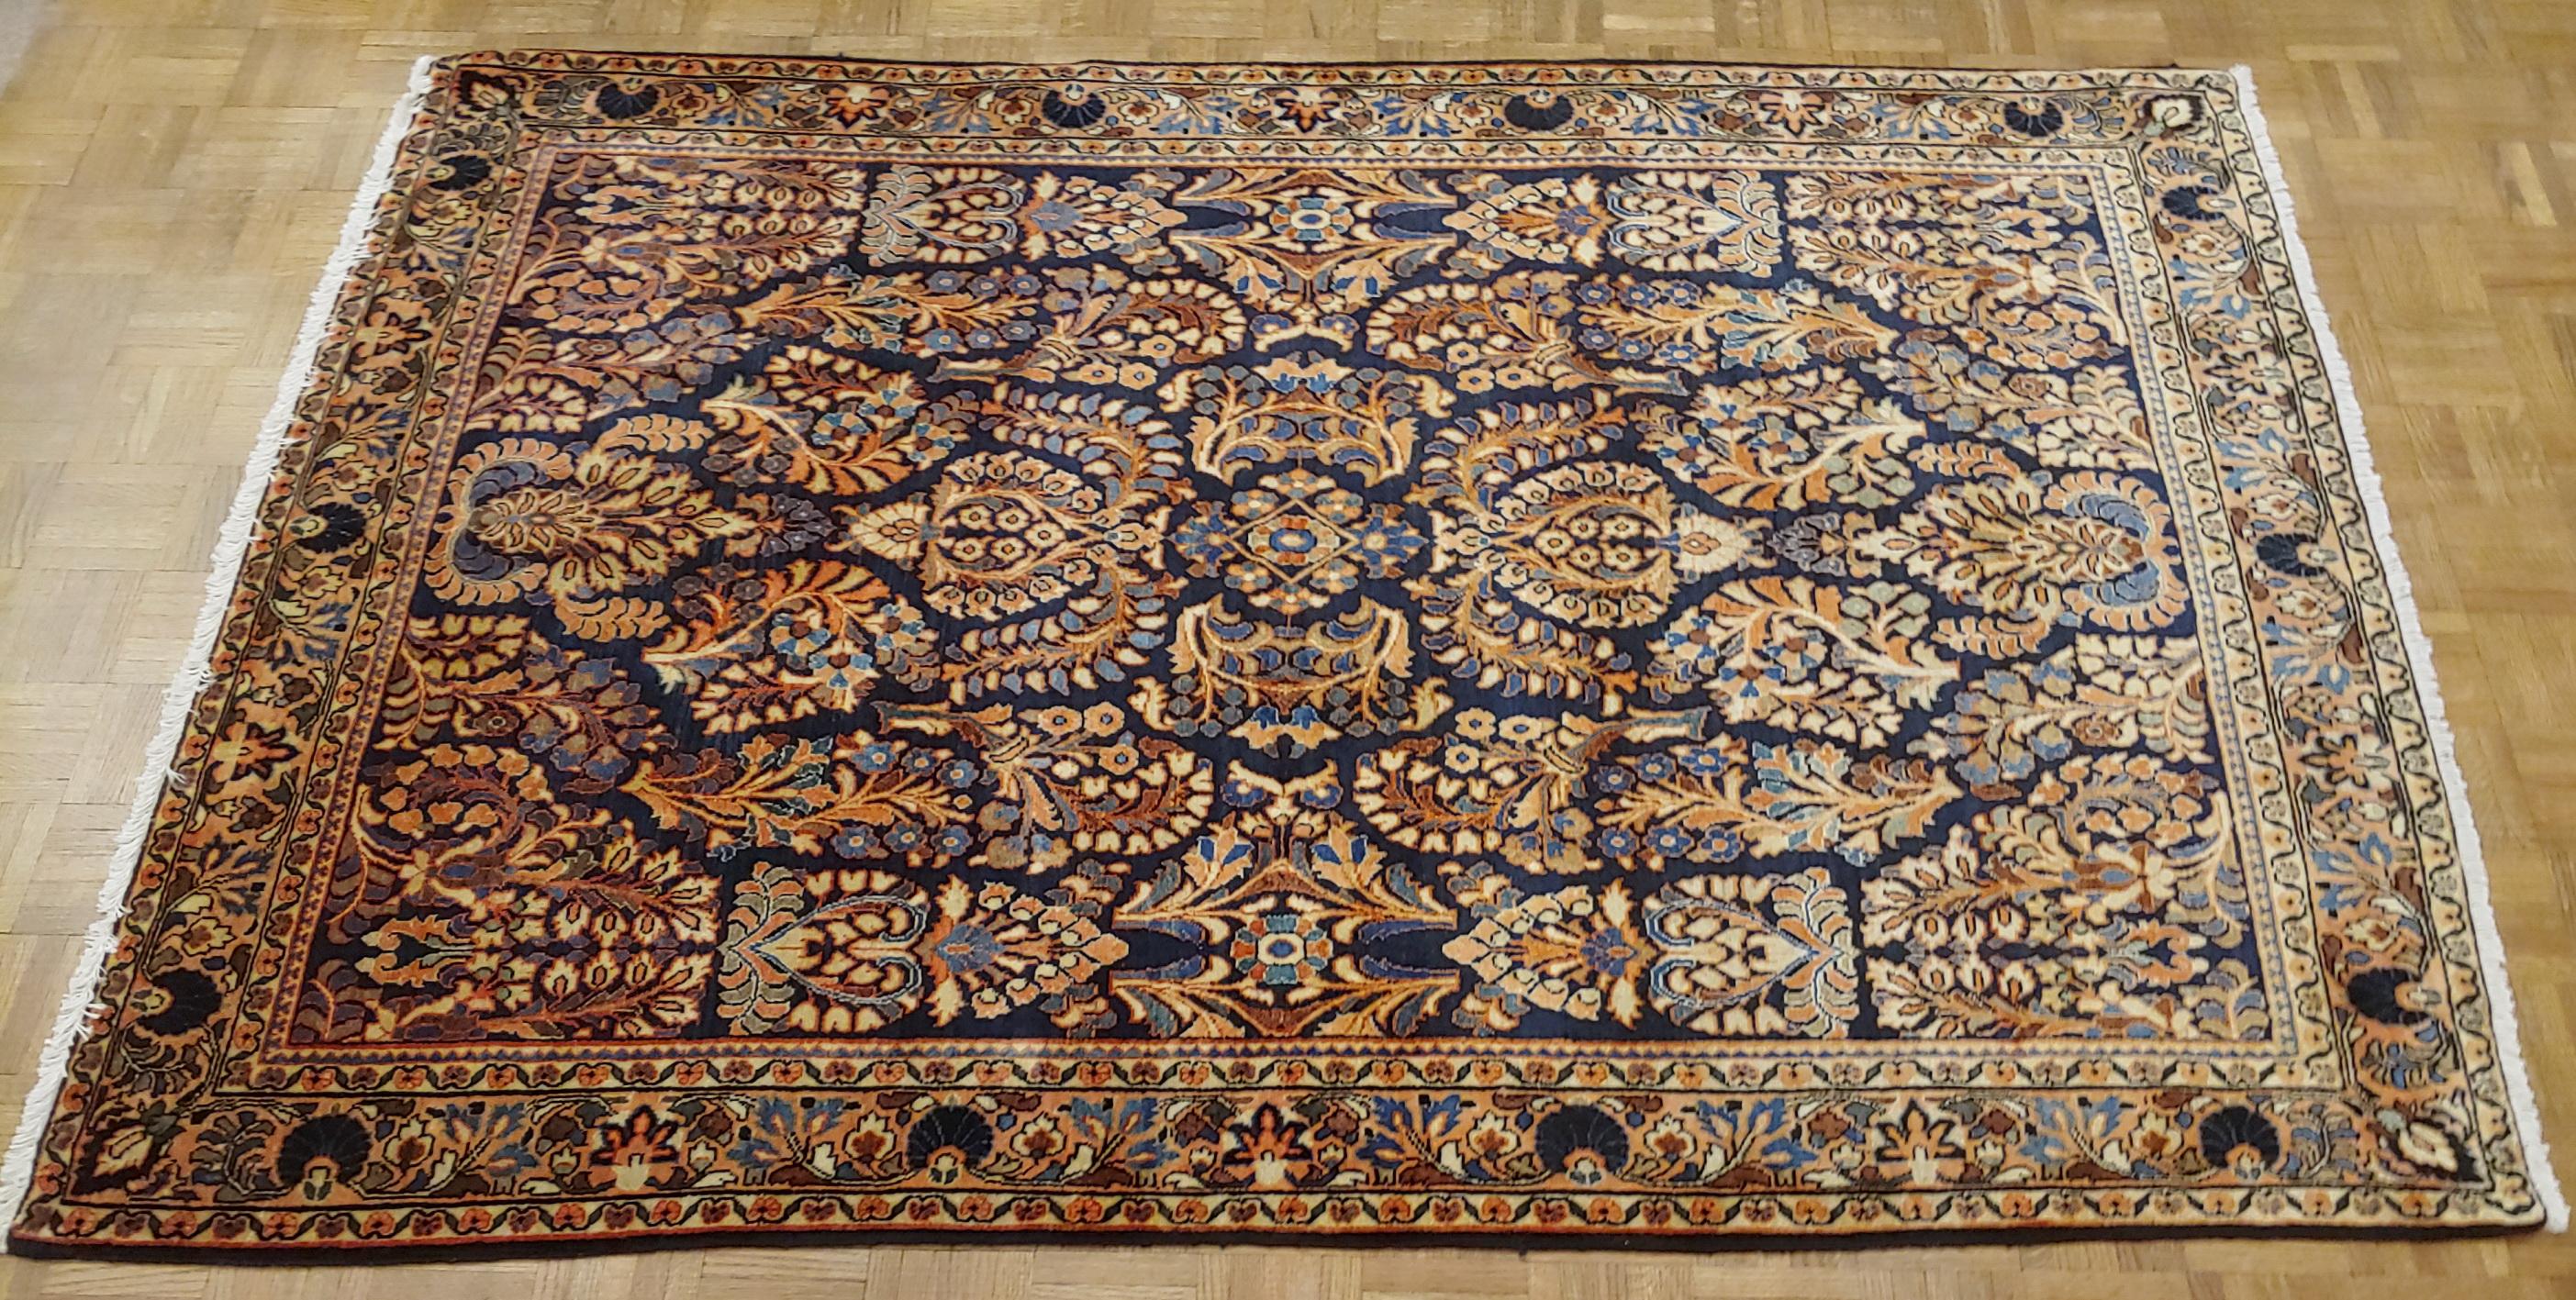 Persian Sarouk with an all-over field design with a navy background and a coral border. The field is decorated with vines, tendrills and flowers in light blue, gold and teal. The wool is so soft that it feels like silk. It is 4-3 x 6-3, circa 1920.